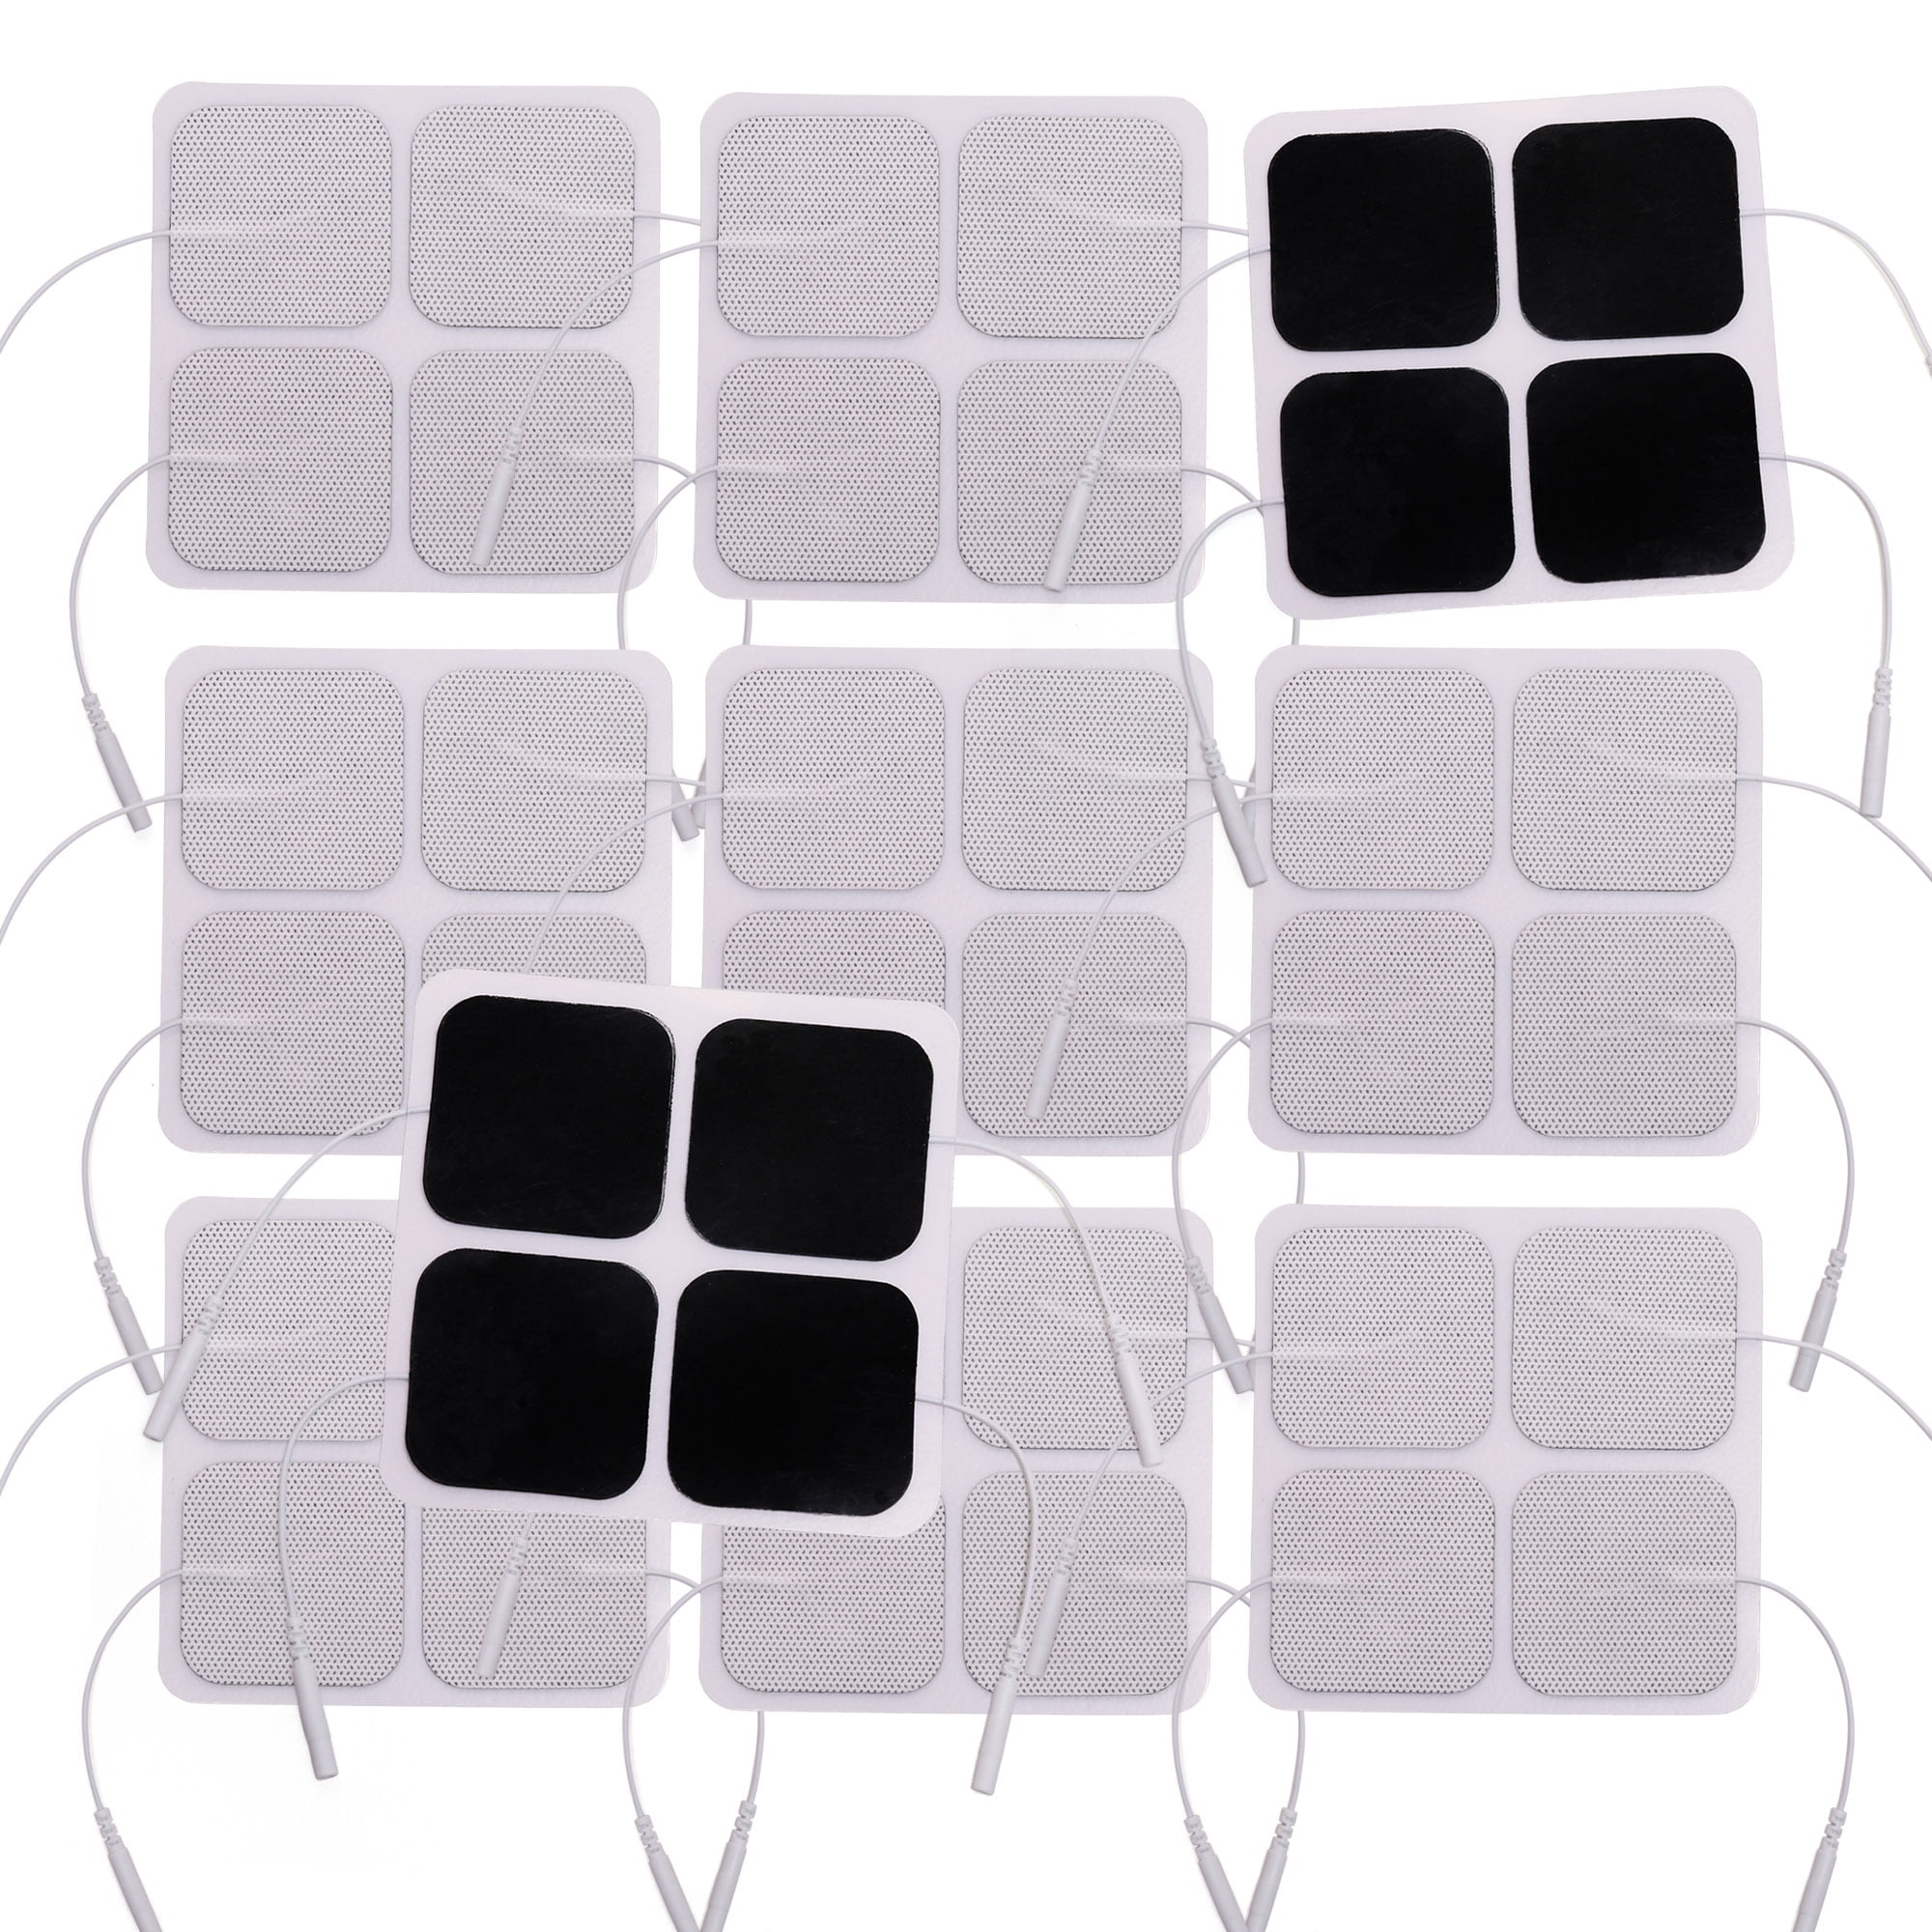 Therapist's Choice 40 Electrode Pads Per Pack, Medical Grade for